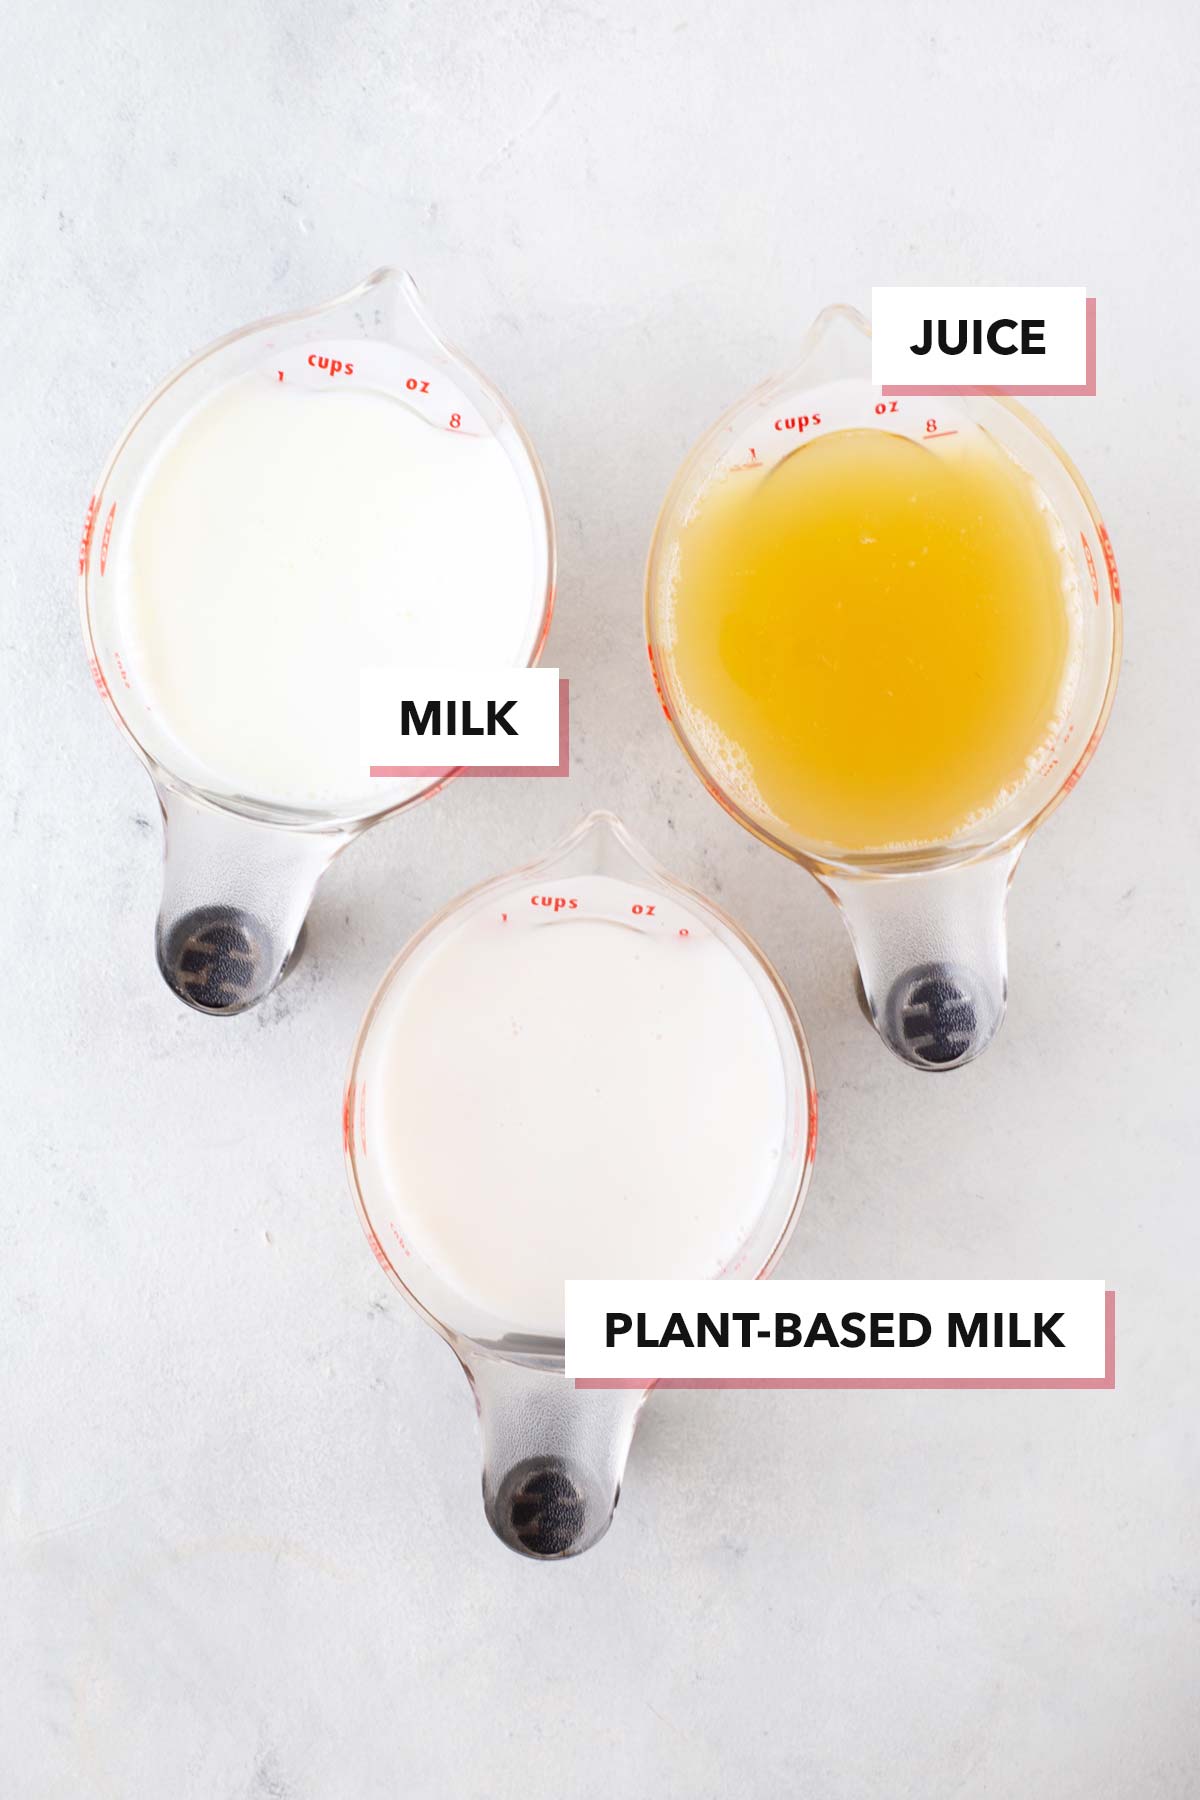 Milk, plant-based milk, and juice, labeled, in measuring cups on a table.